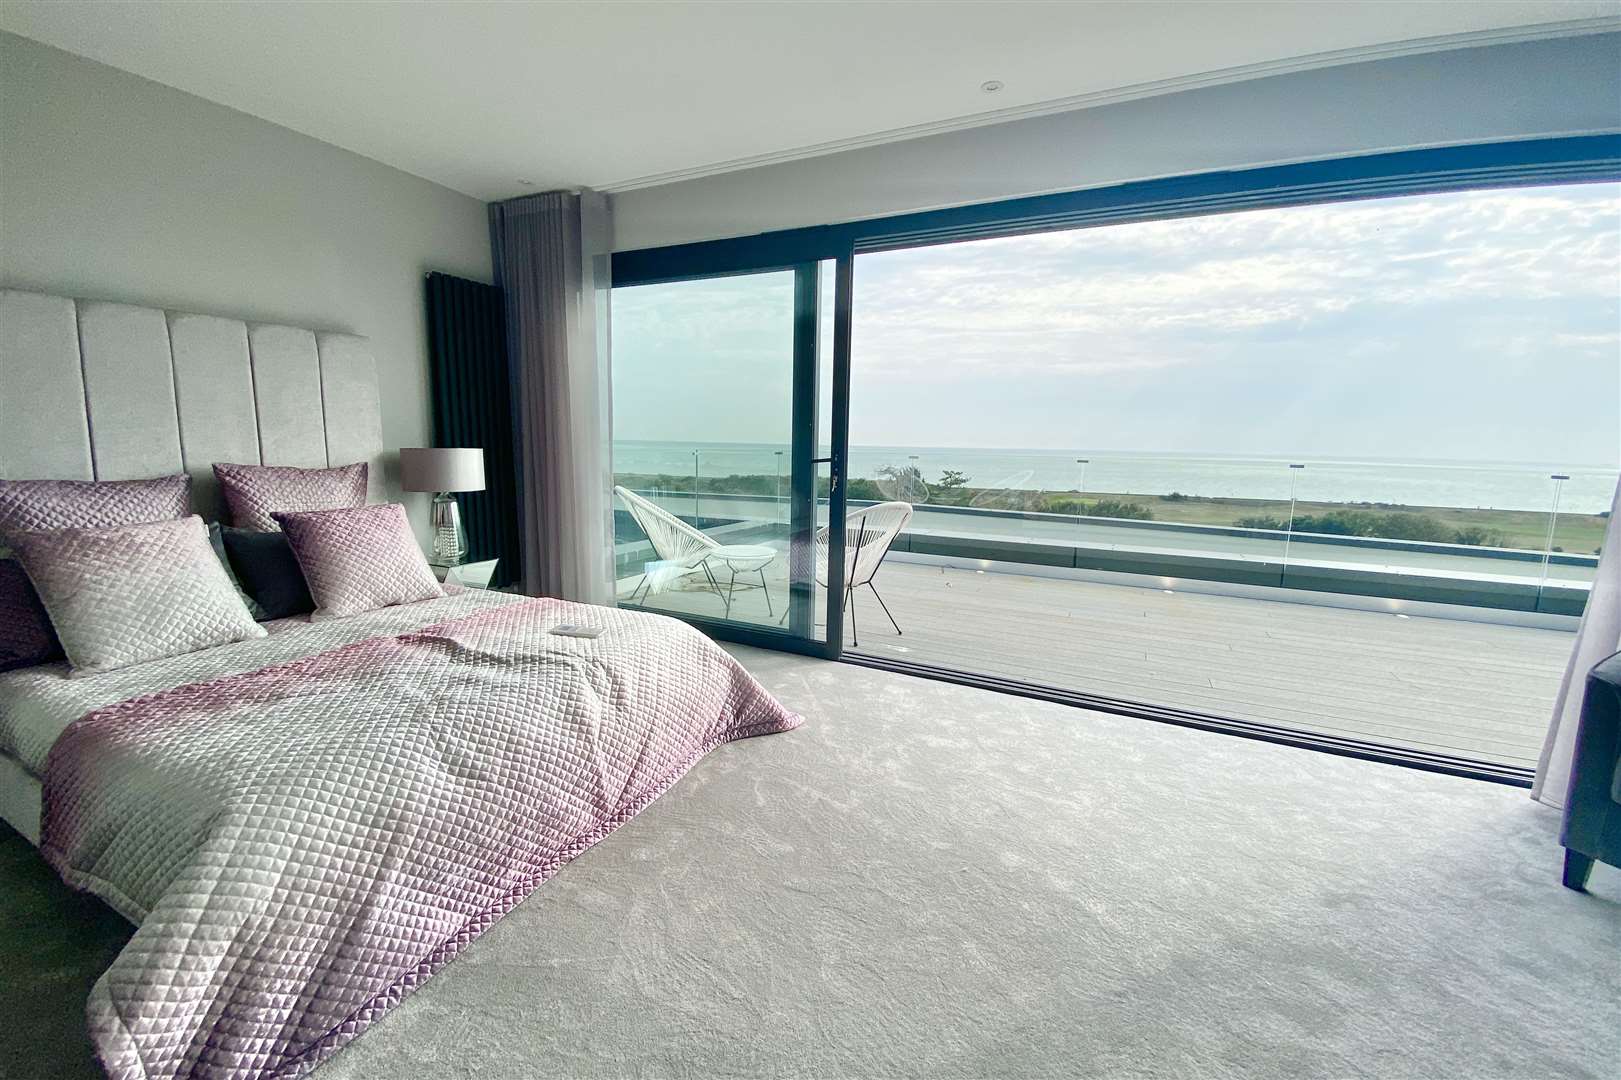 You can relax in bed and look out at the sea - for £1.1m Picture: CR Child